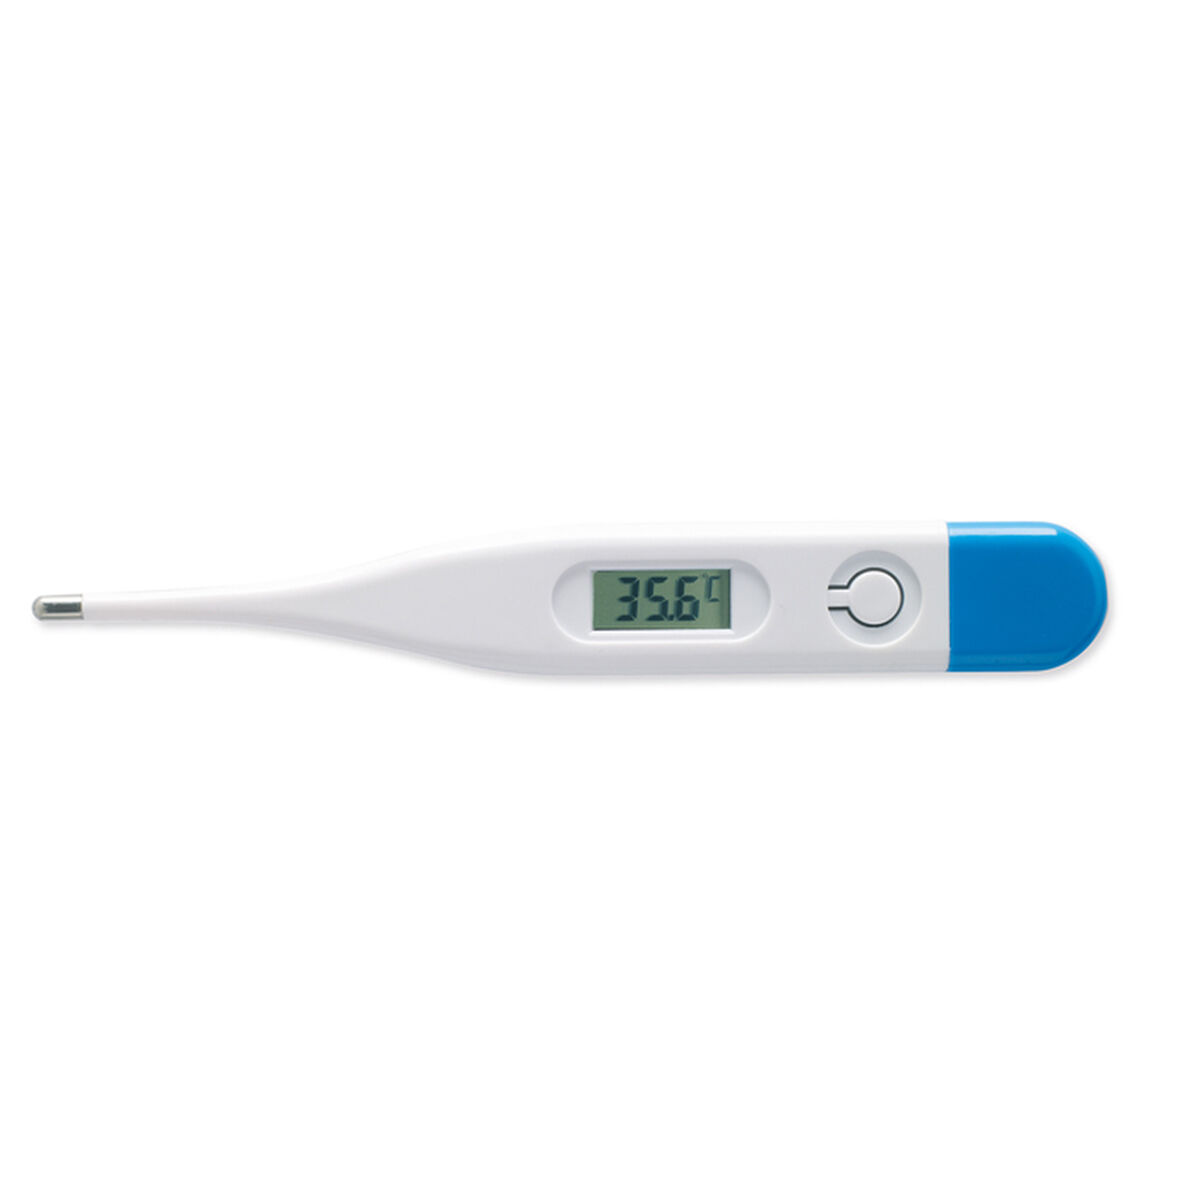 Digital thermometer in clear plastic protective case